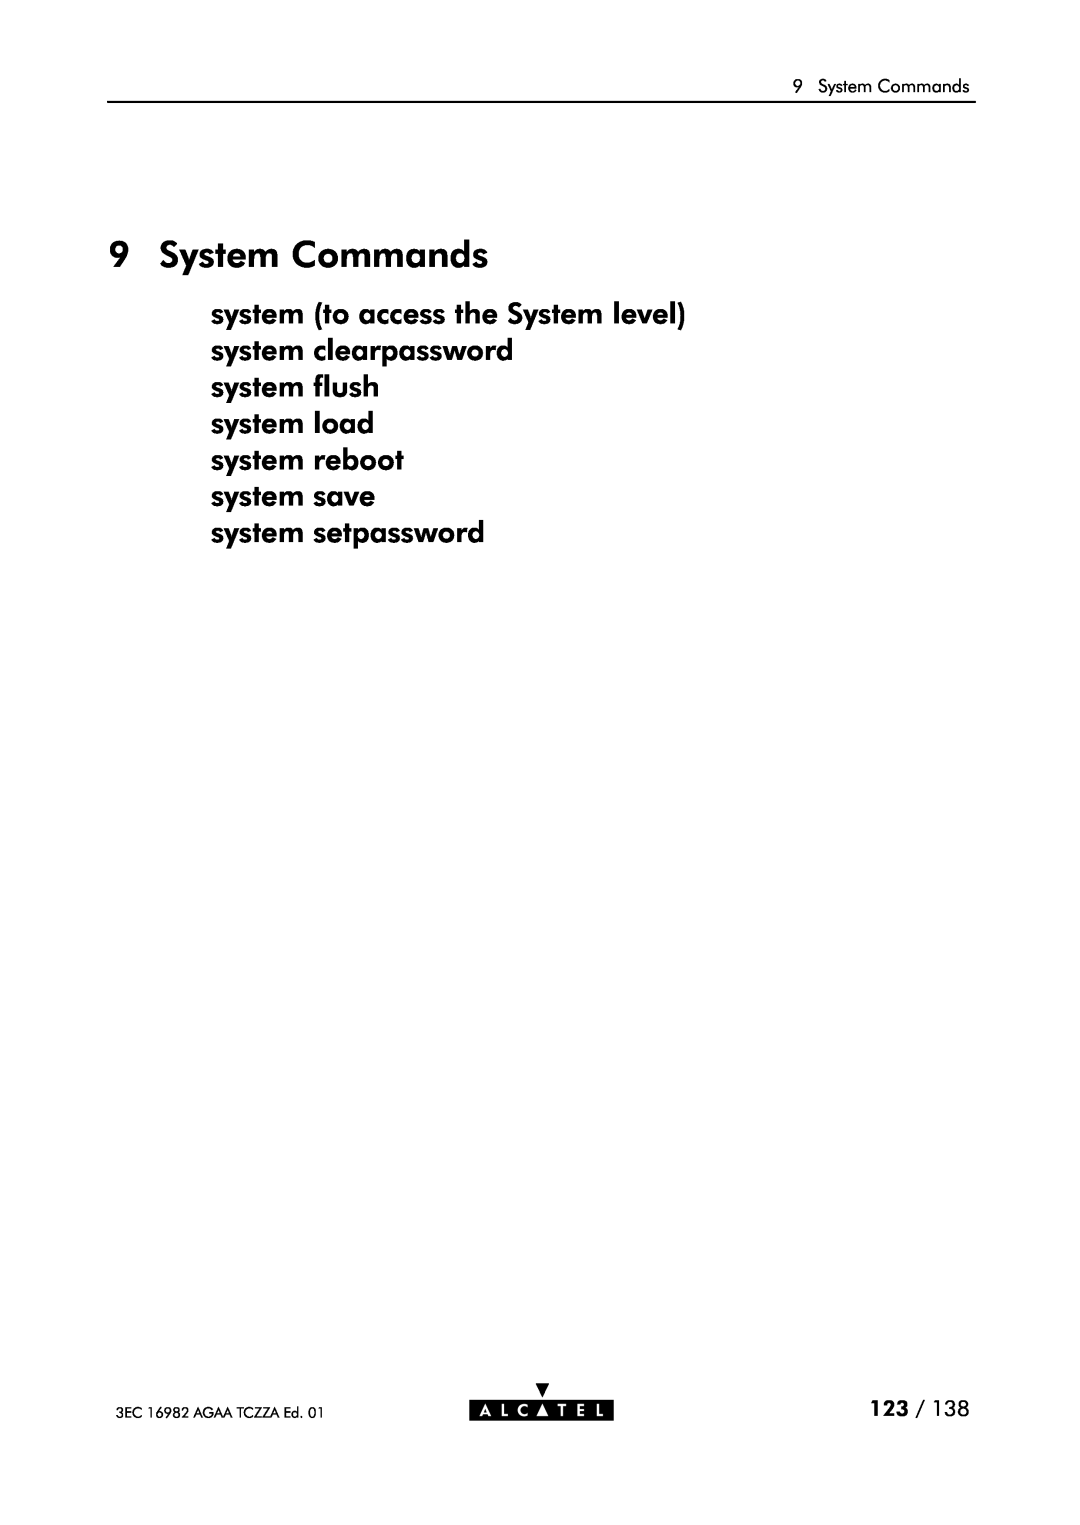 Alcatel Carrier Internetworking Solutions 350I System Commands, system to access the System level system clearpassword 